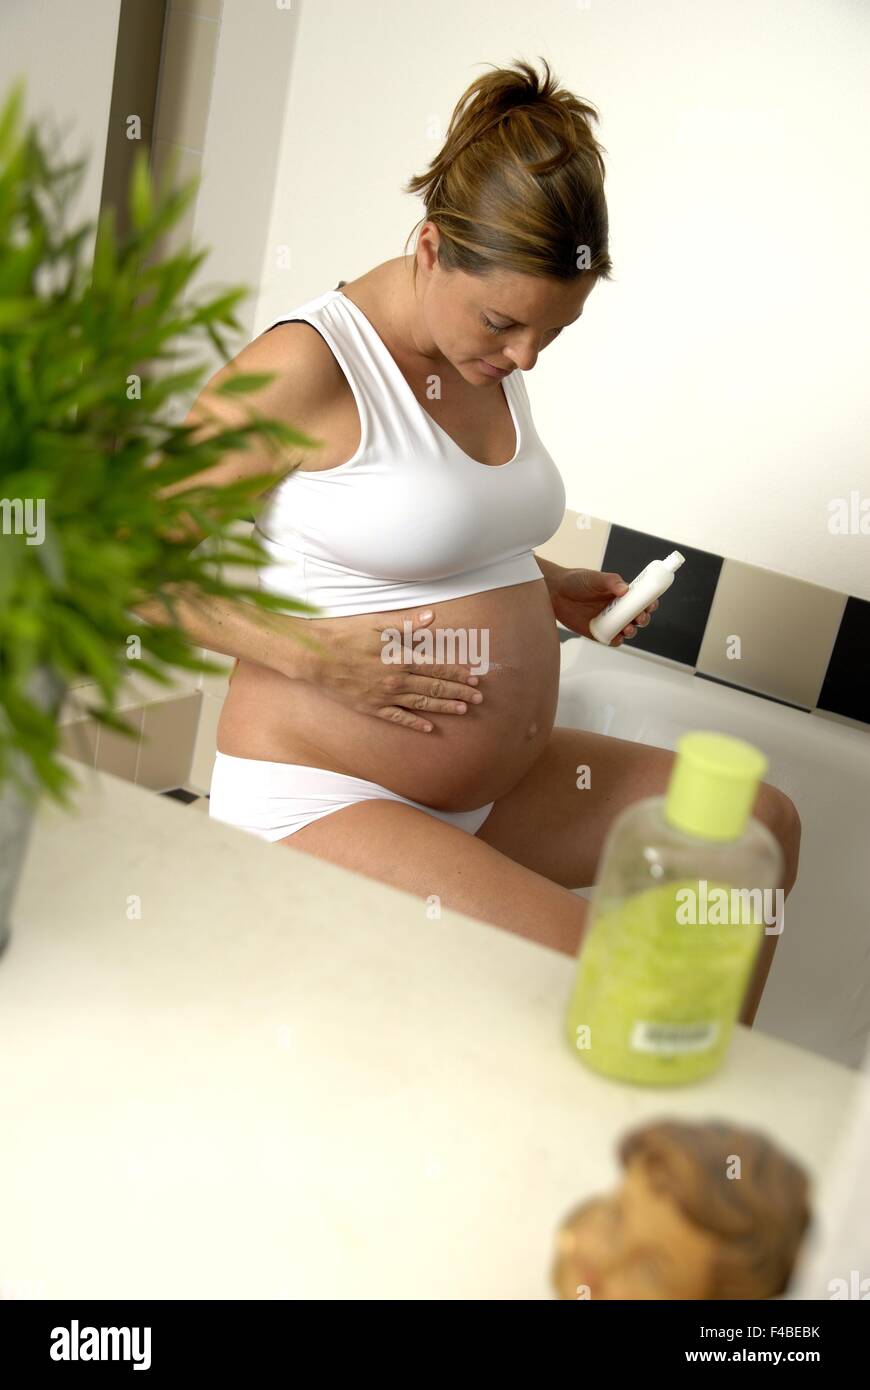 pregnant young woman applying body lotion Stock Photo